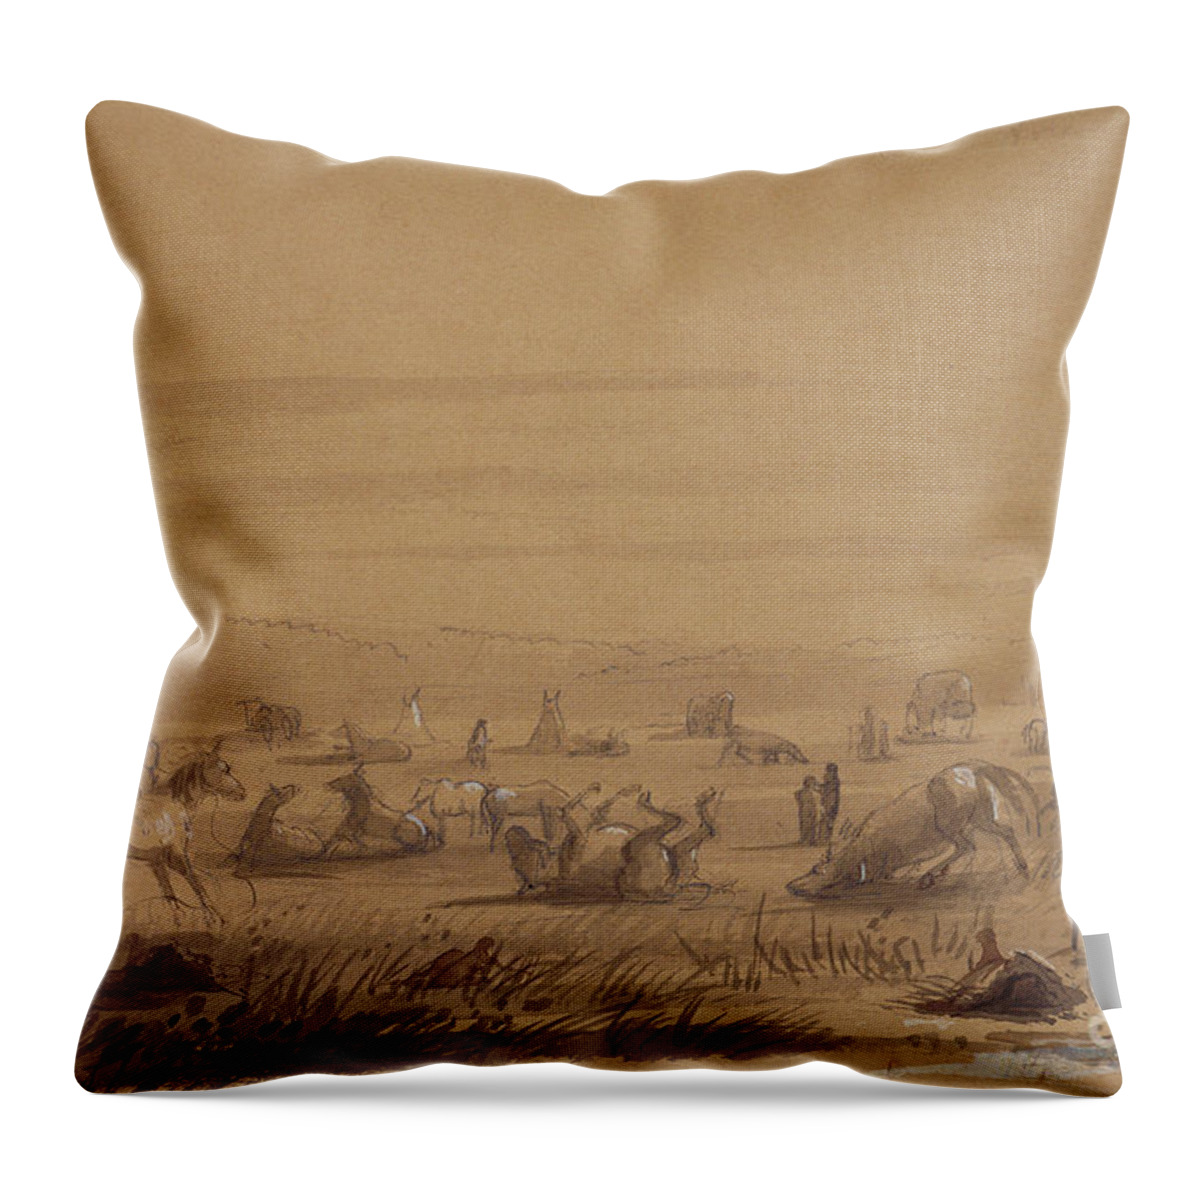 19th Century Throw Pillow featuring the painting Reaching Camp, Removing The Saddles, C.1837 by Alfred Jacob Miller